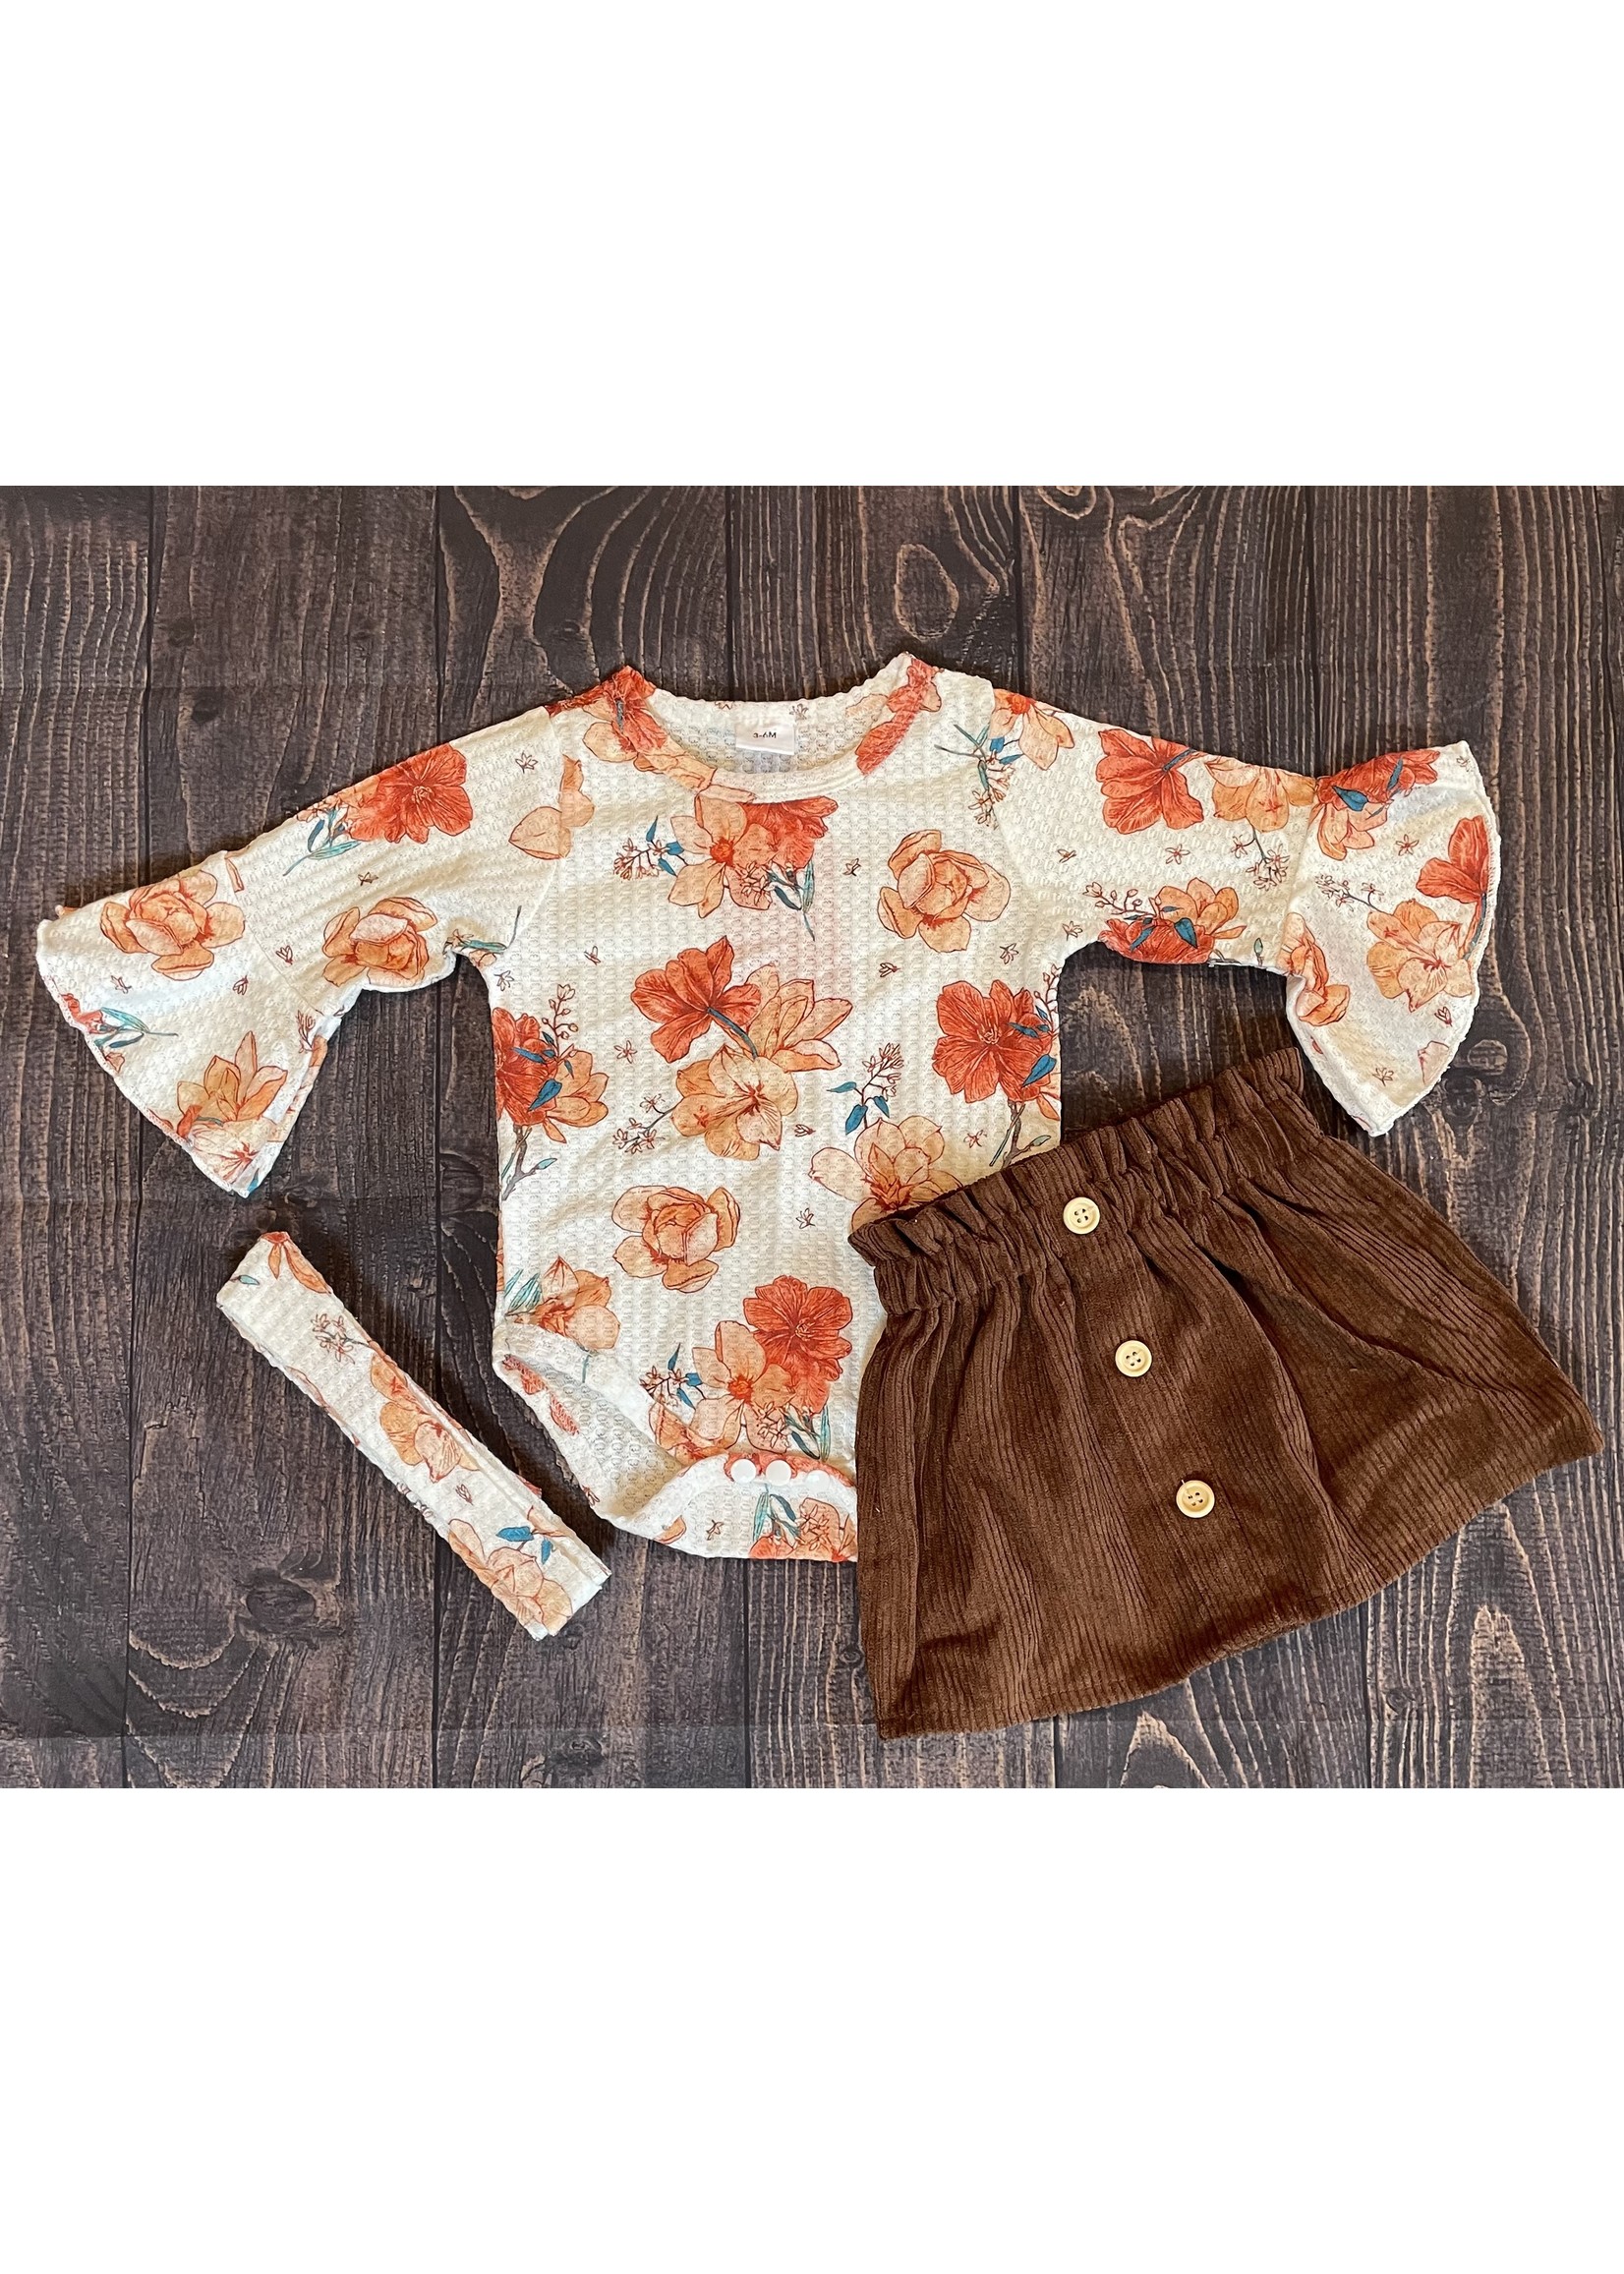 Baby Floral Top with Brown Button Skirt